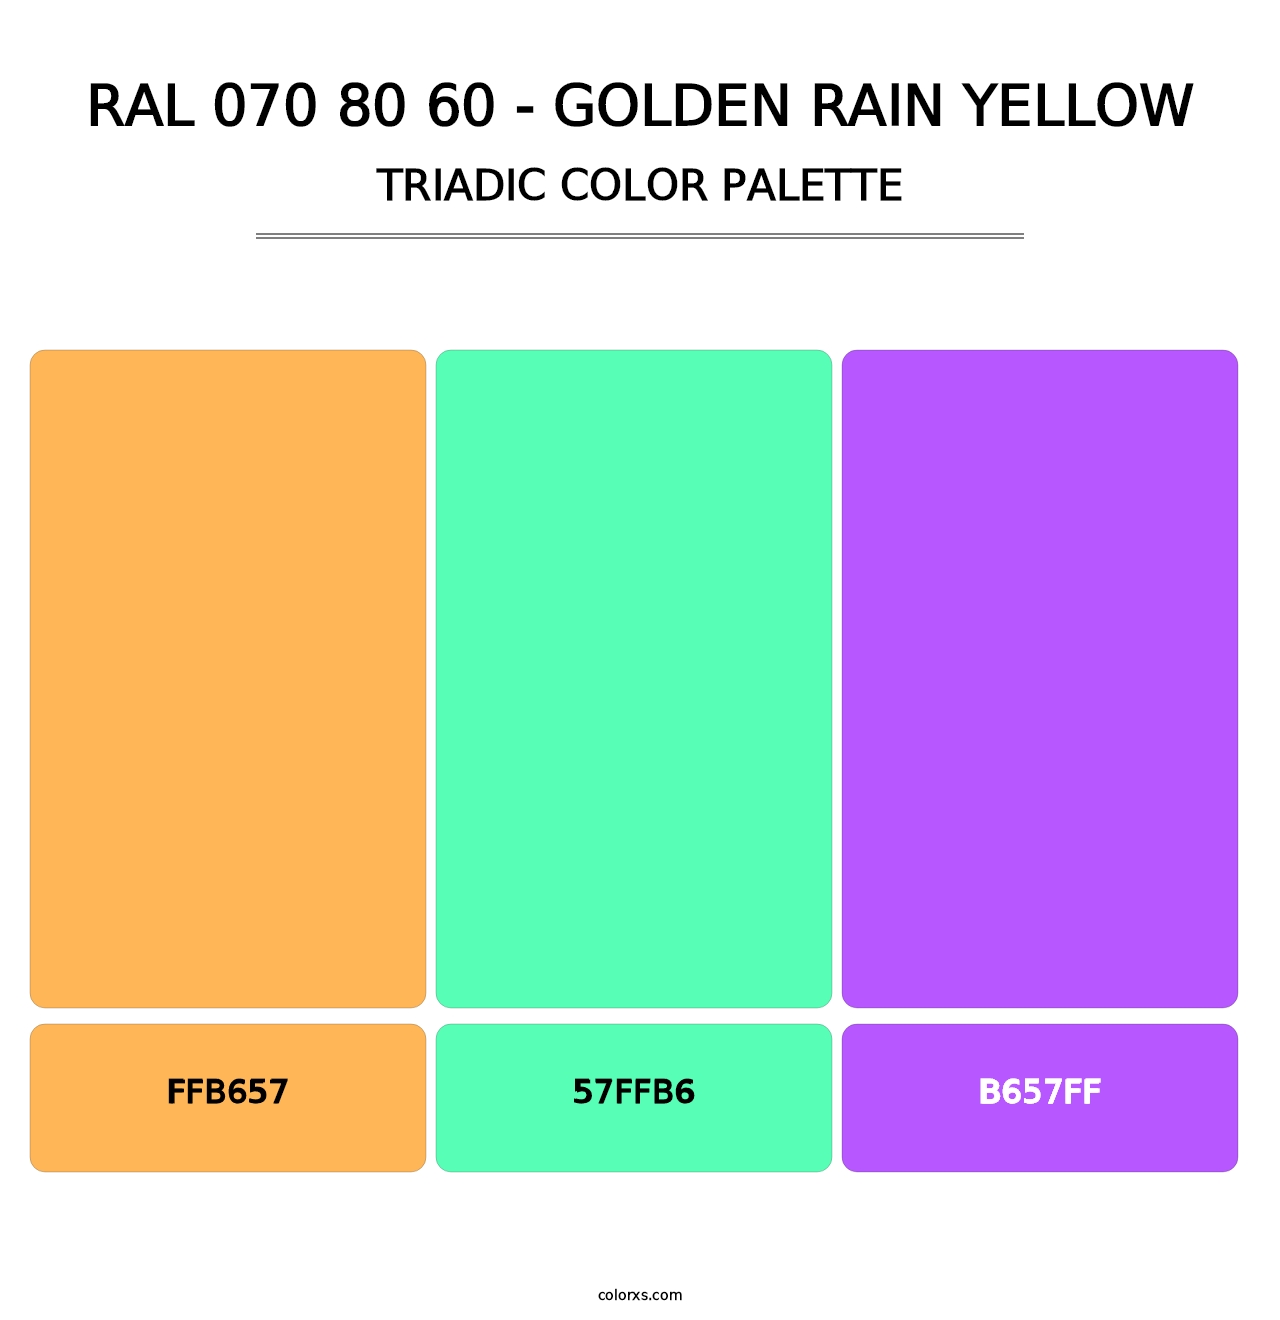 RAL 070 80 60 - Golden Rain Yellow - Triadic Color Palette